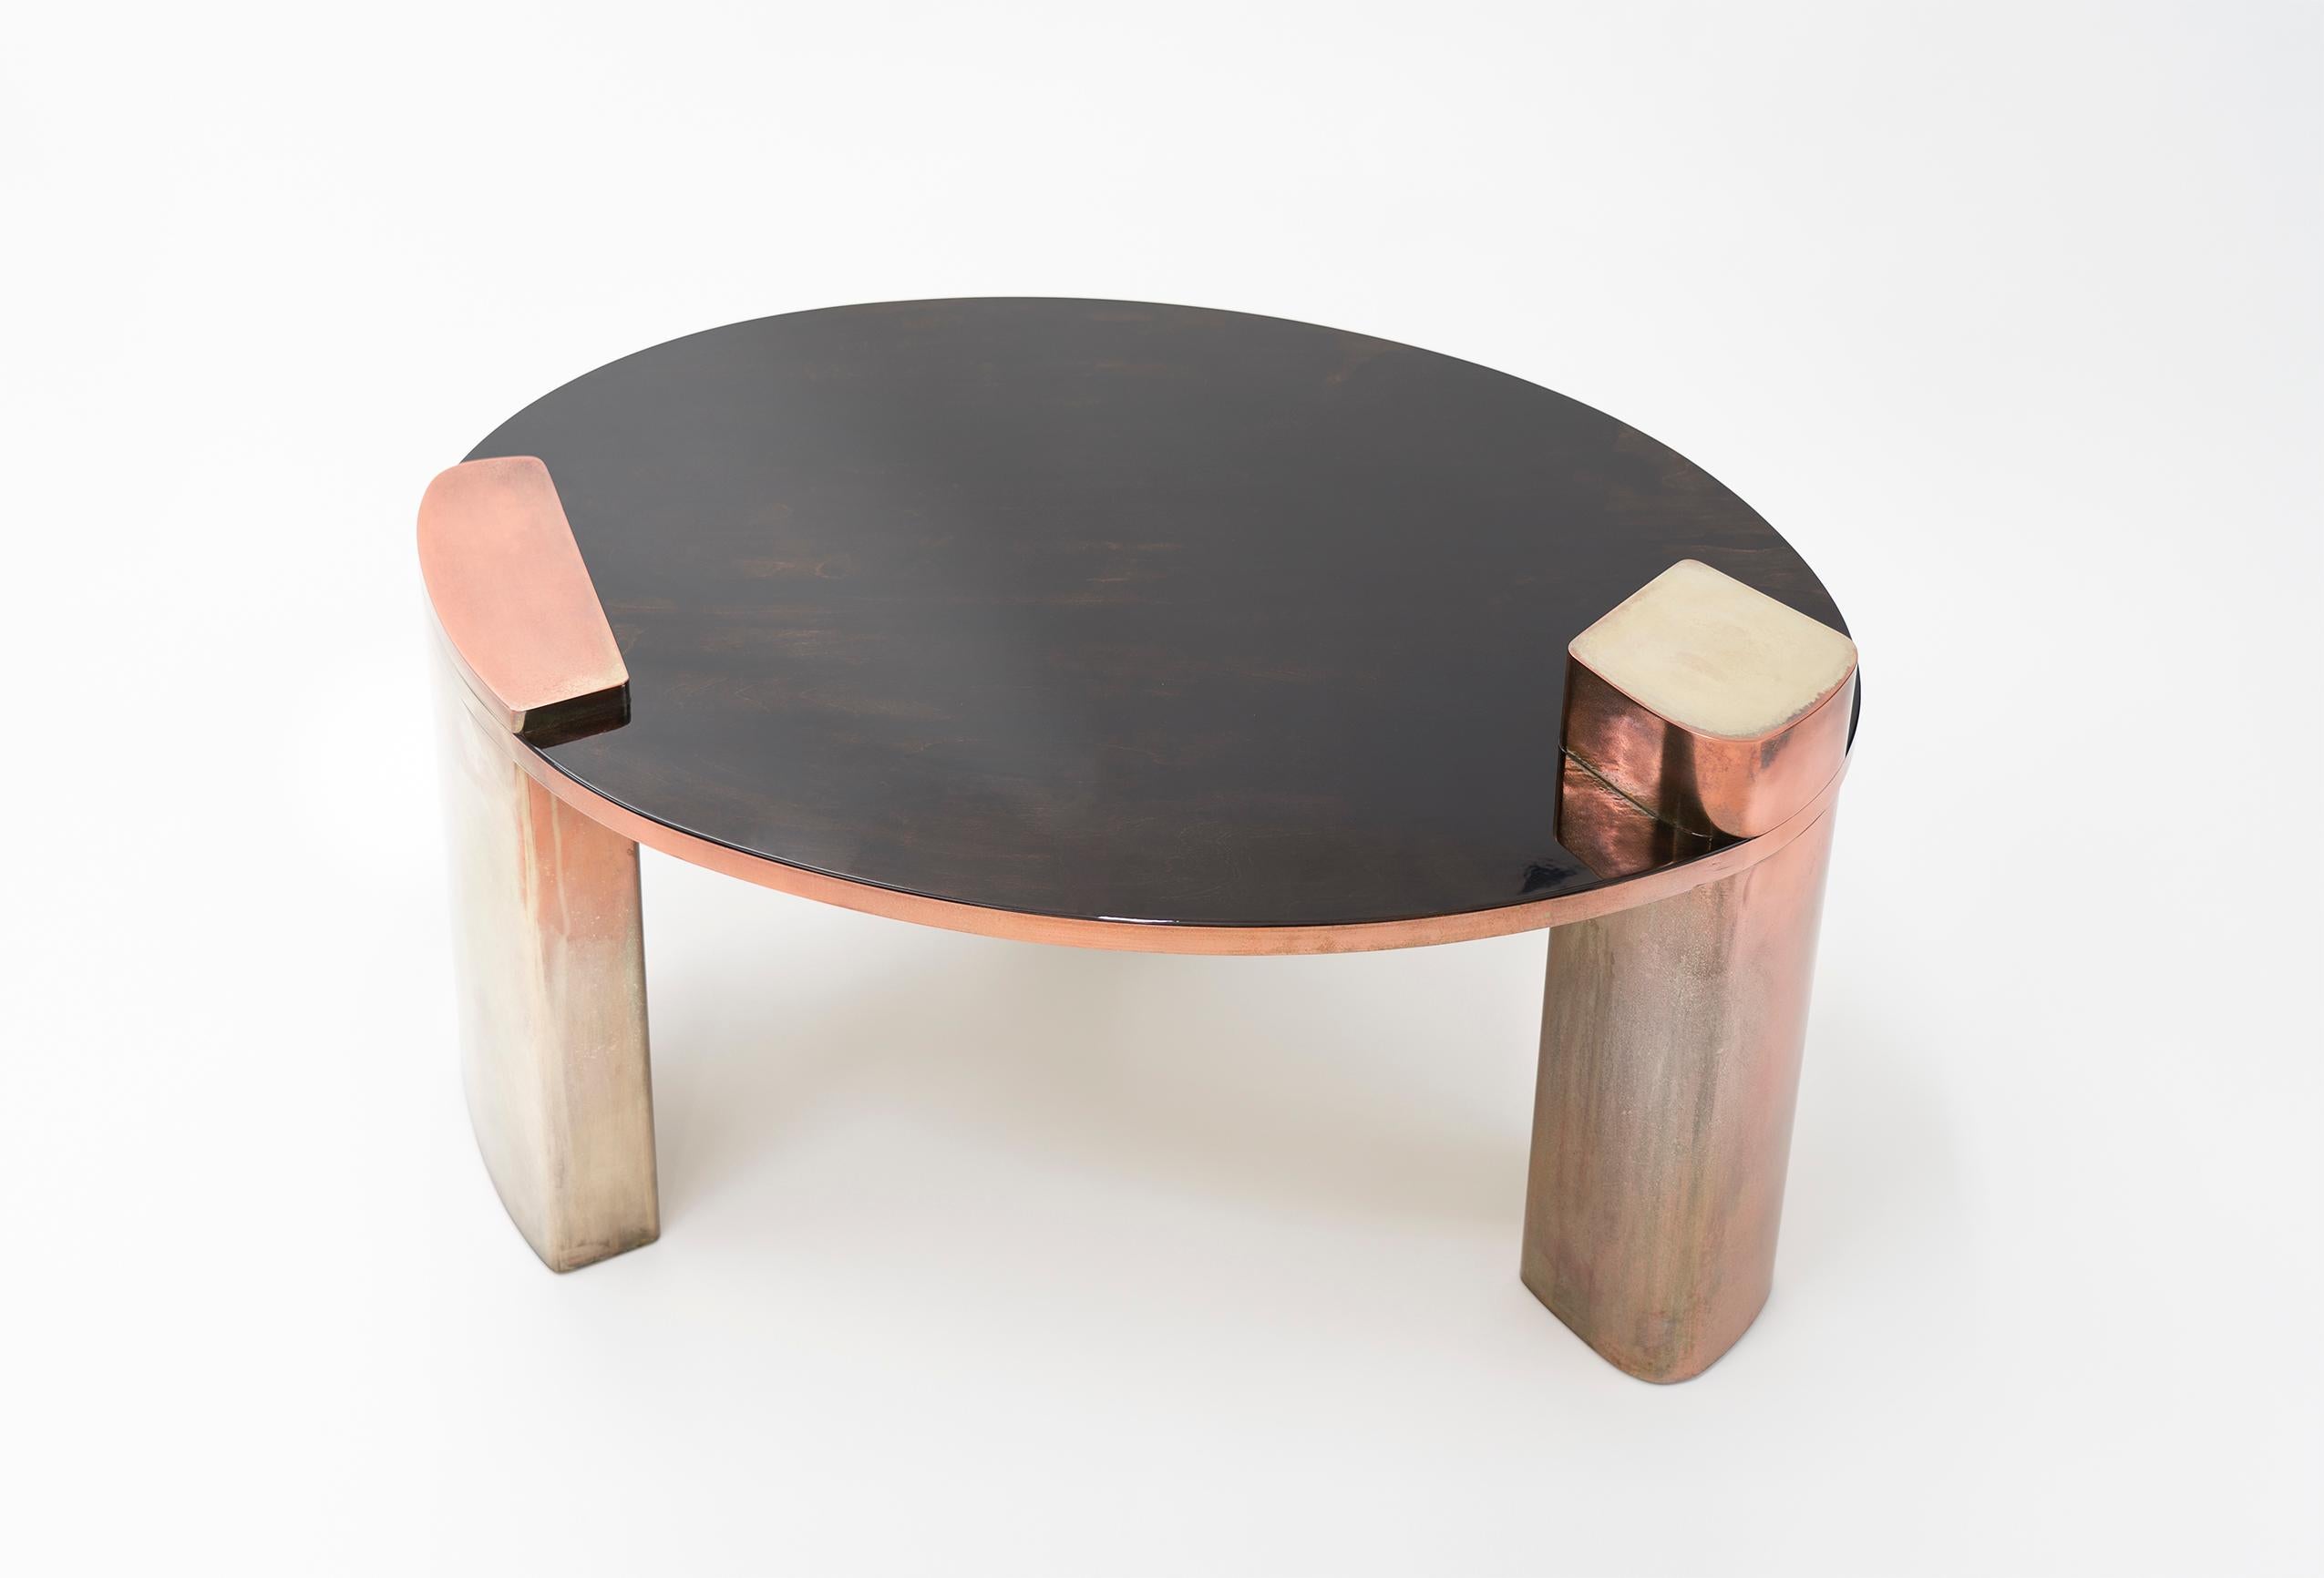 New Moon–21st century lacquered mahogany and silvered copper luxury low table

Our attraction to the Moon is not slighter than the witnessed obsession with our pale satellite from the fading past to every new sunset reborning. Our last table from